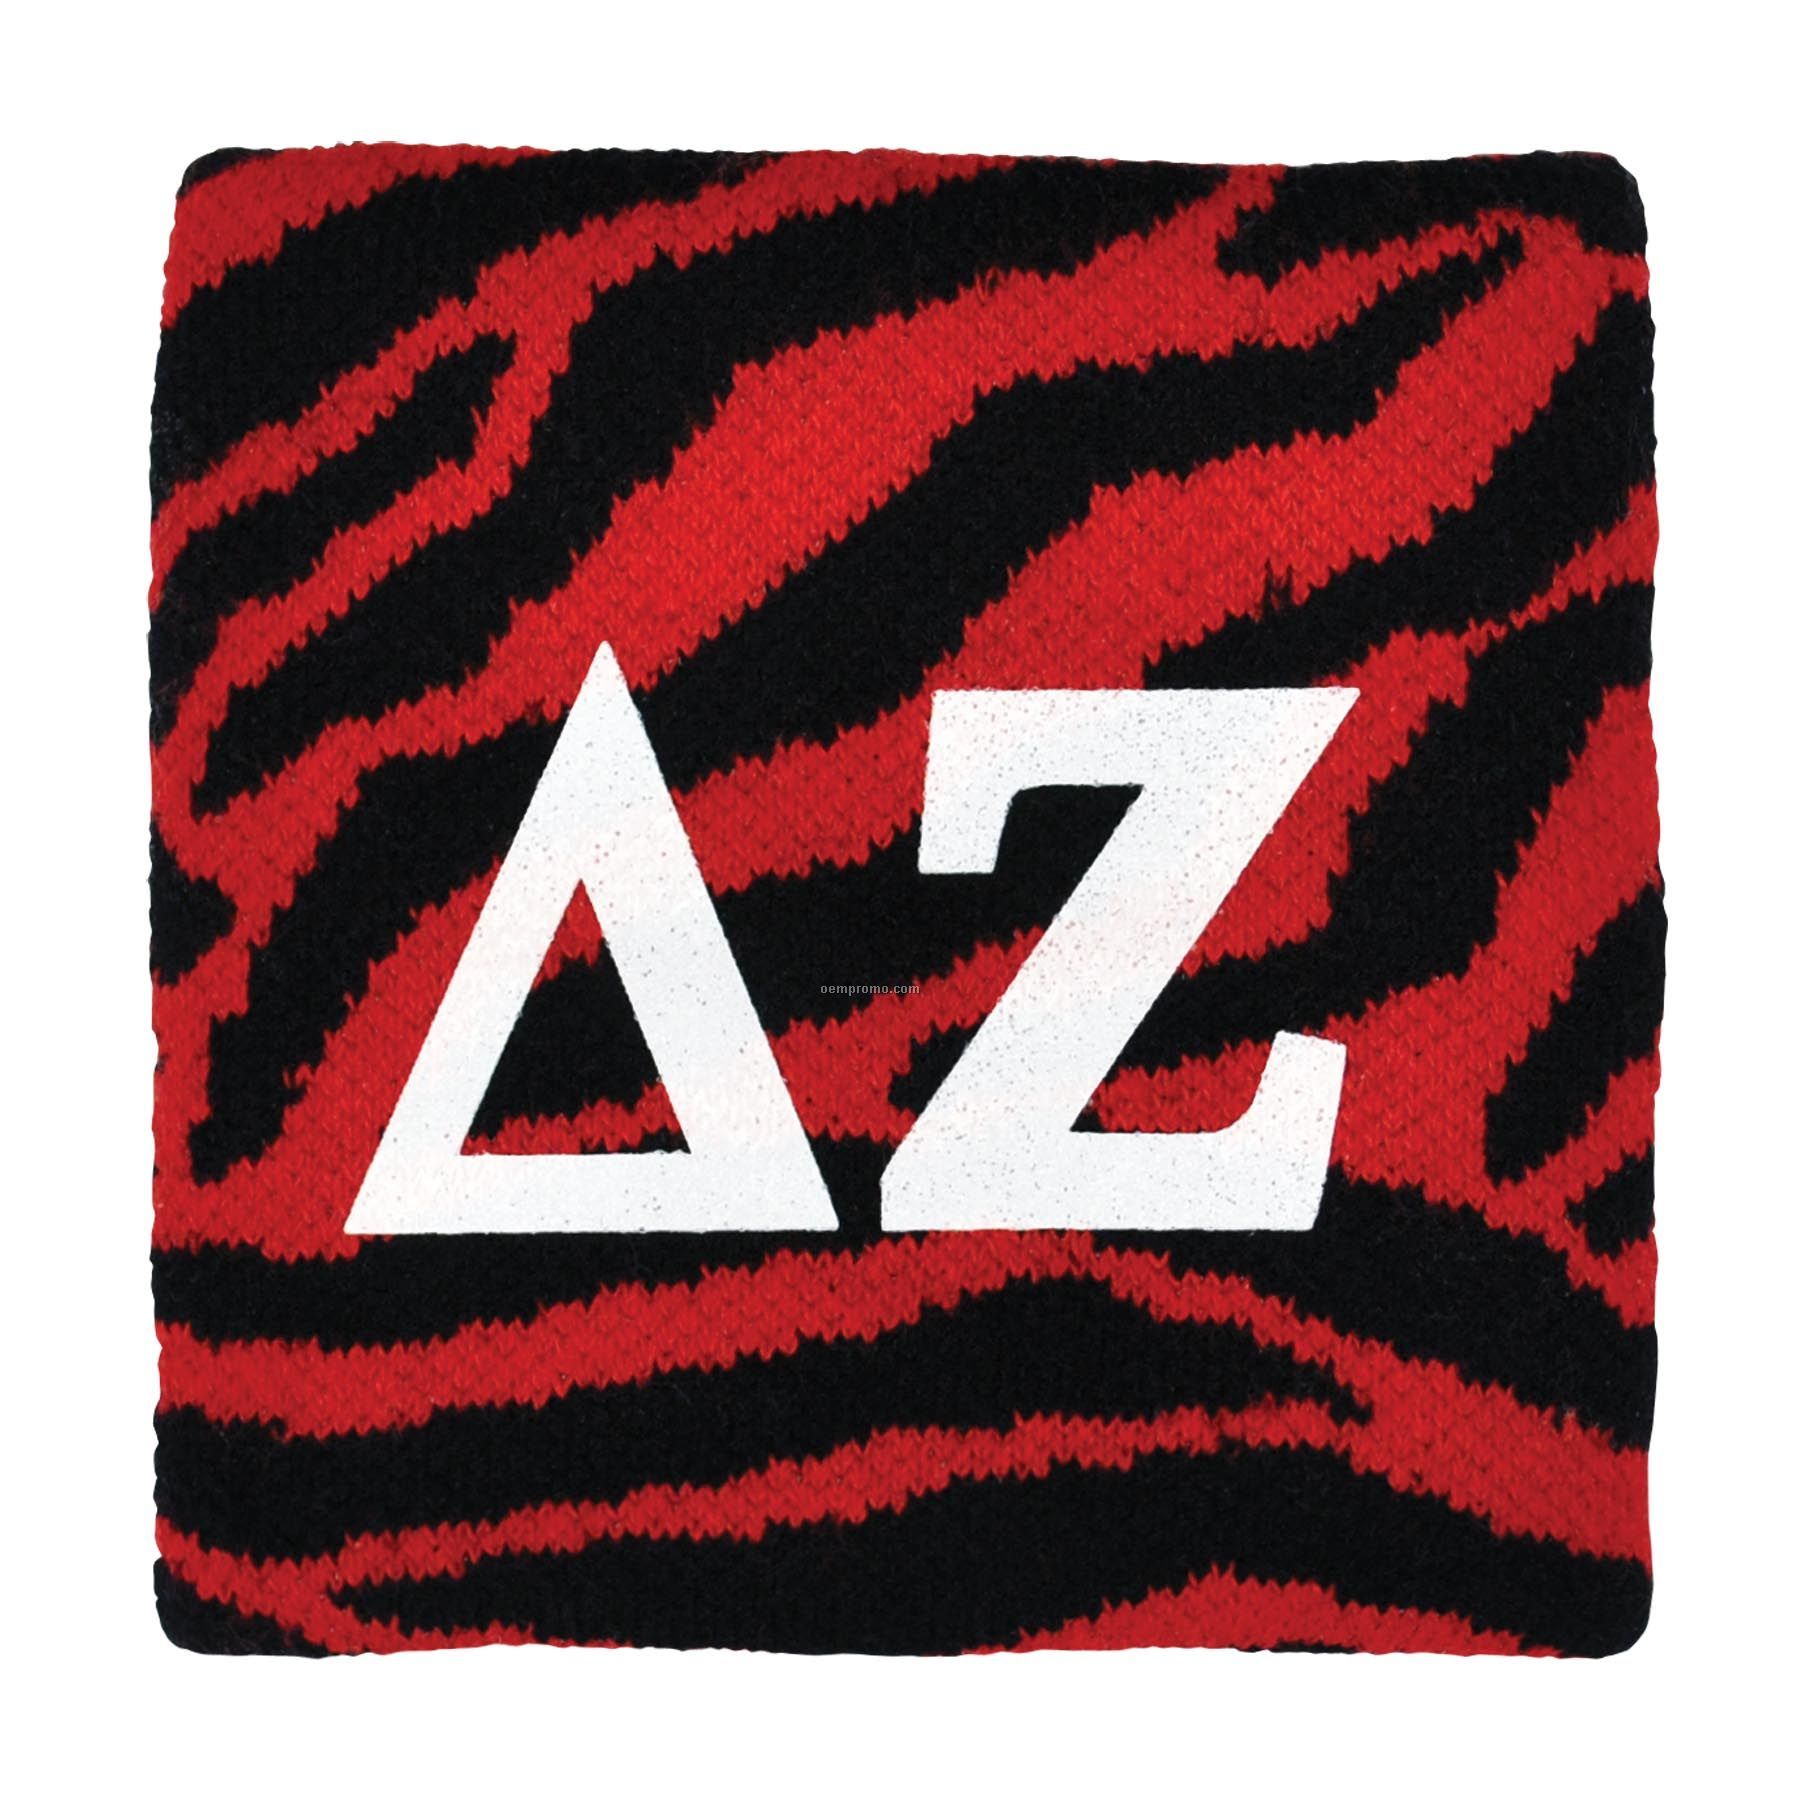 Zebra Wristband With 1-color Heat Transfer Or Printed Applique